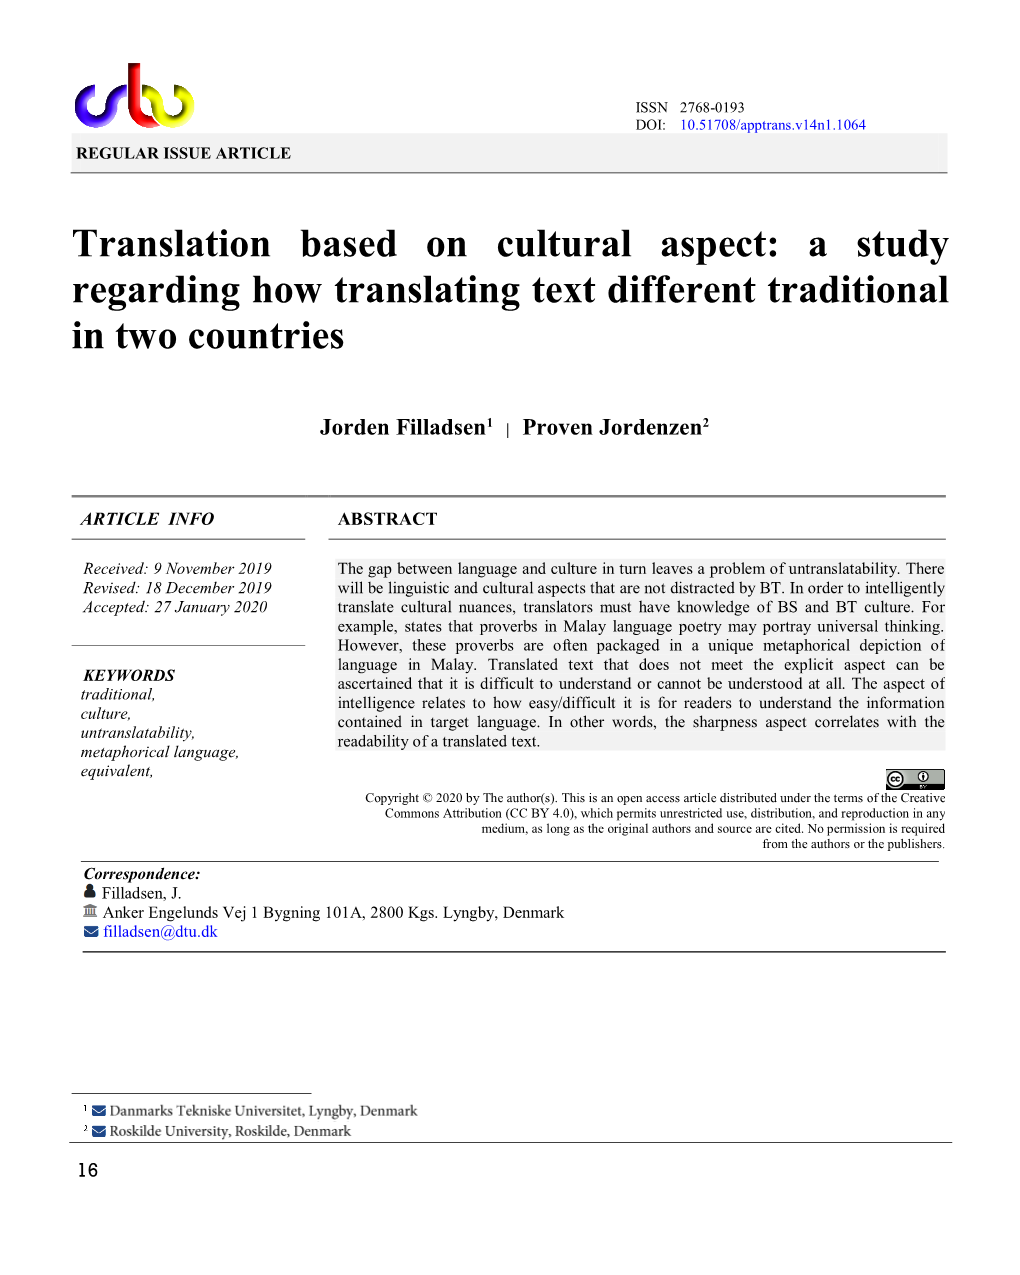 Translation Based on Cultural Aspect: a Study Regarding How Translating Text Different Traditional in Two Countries